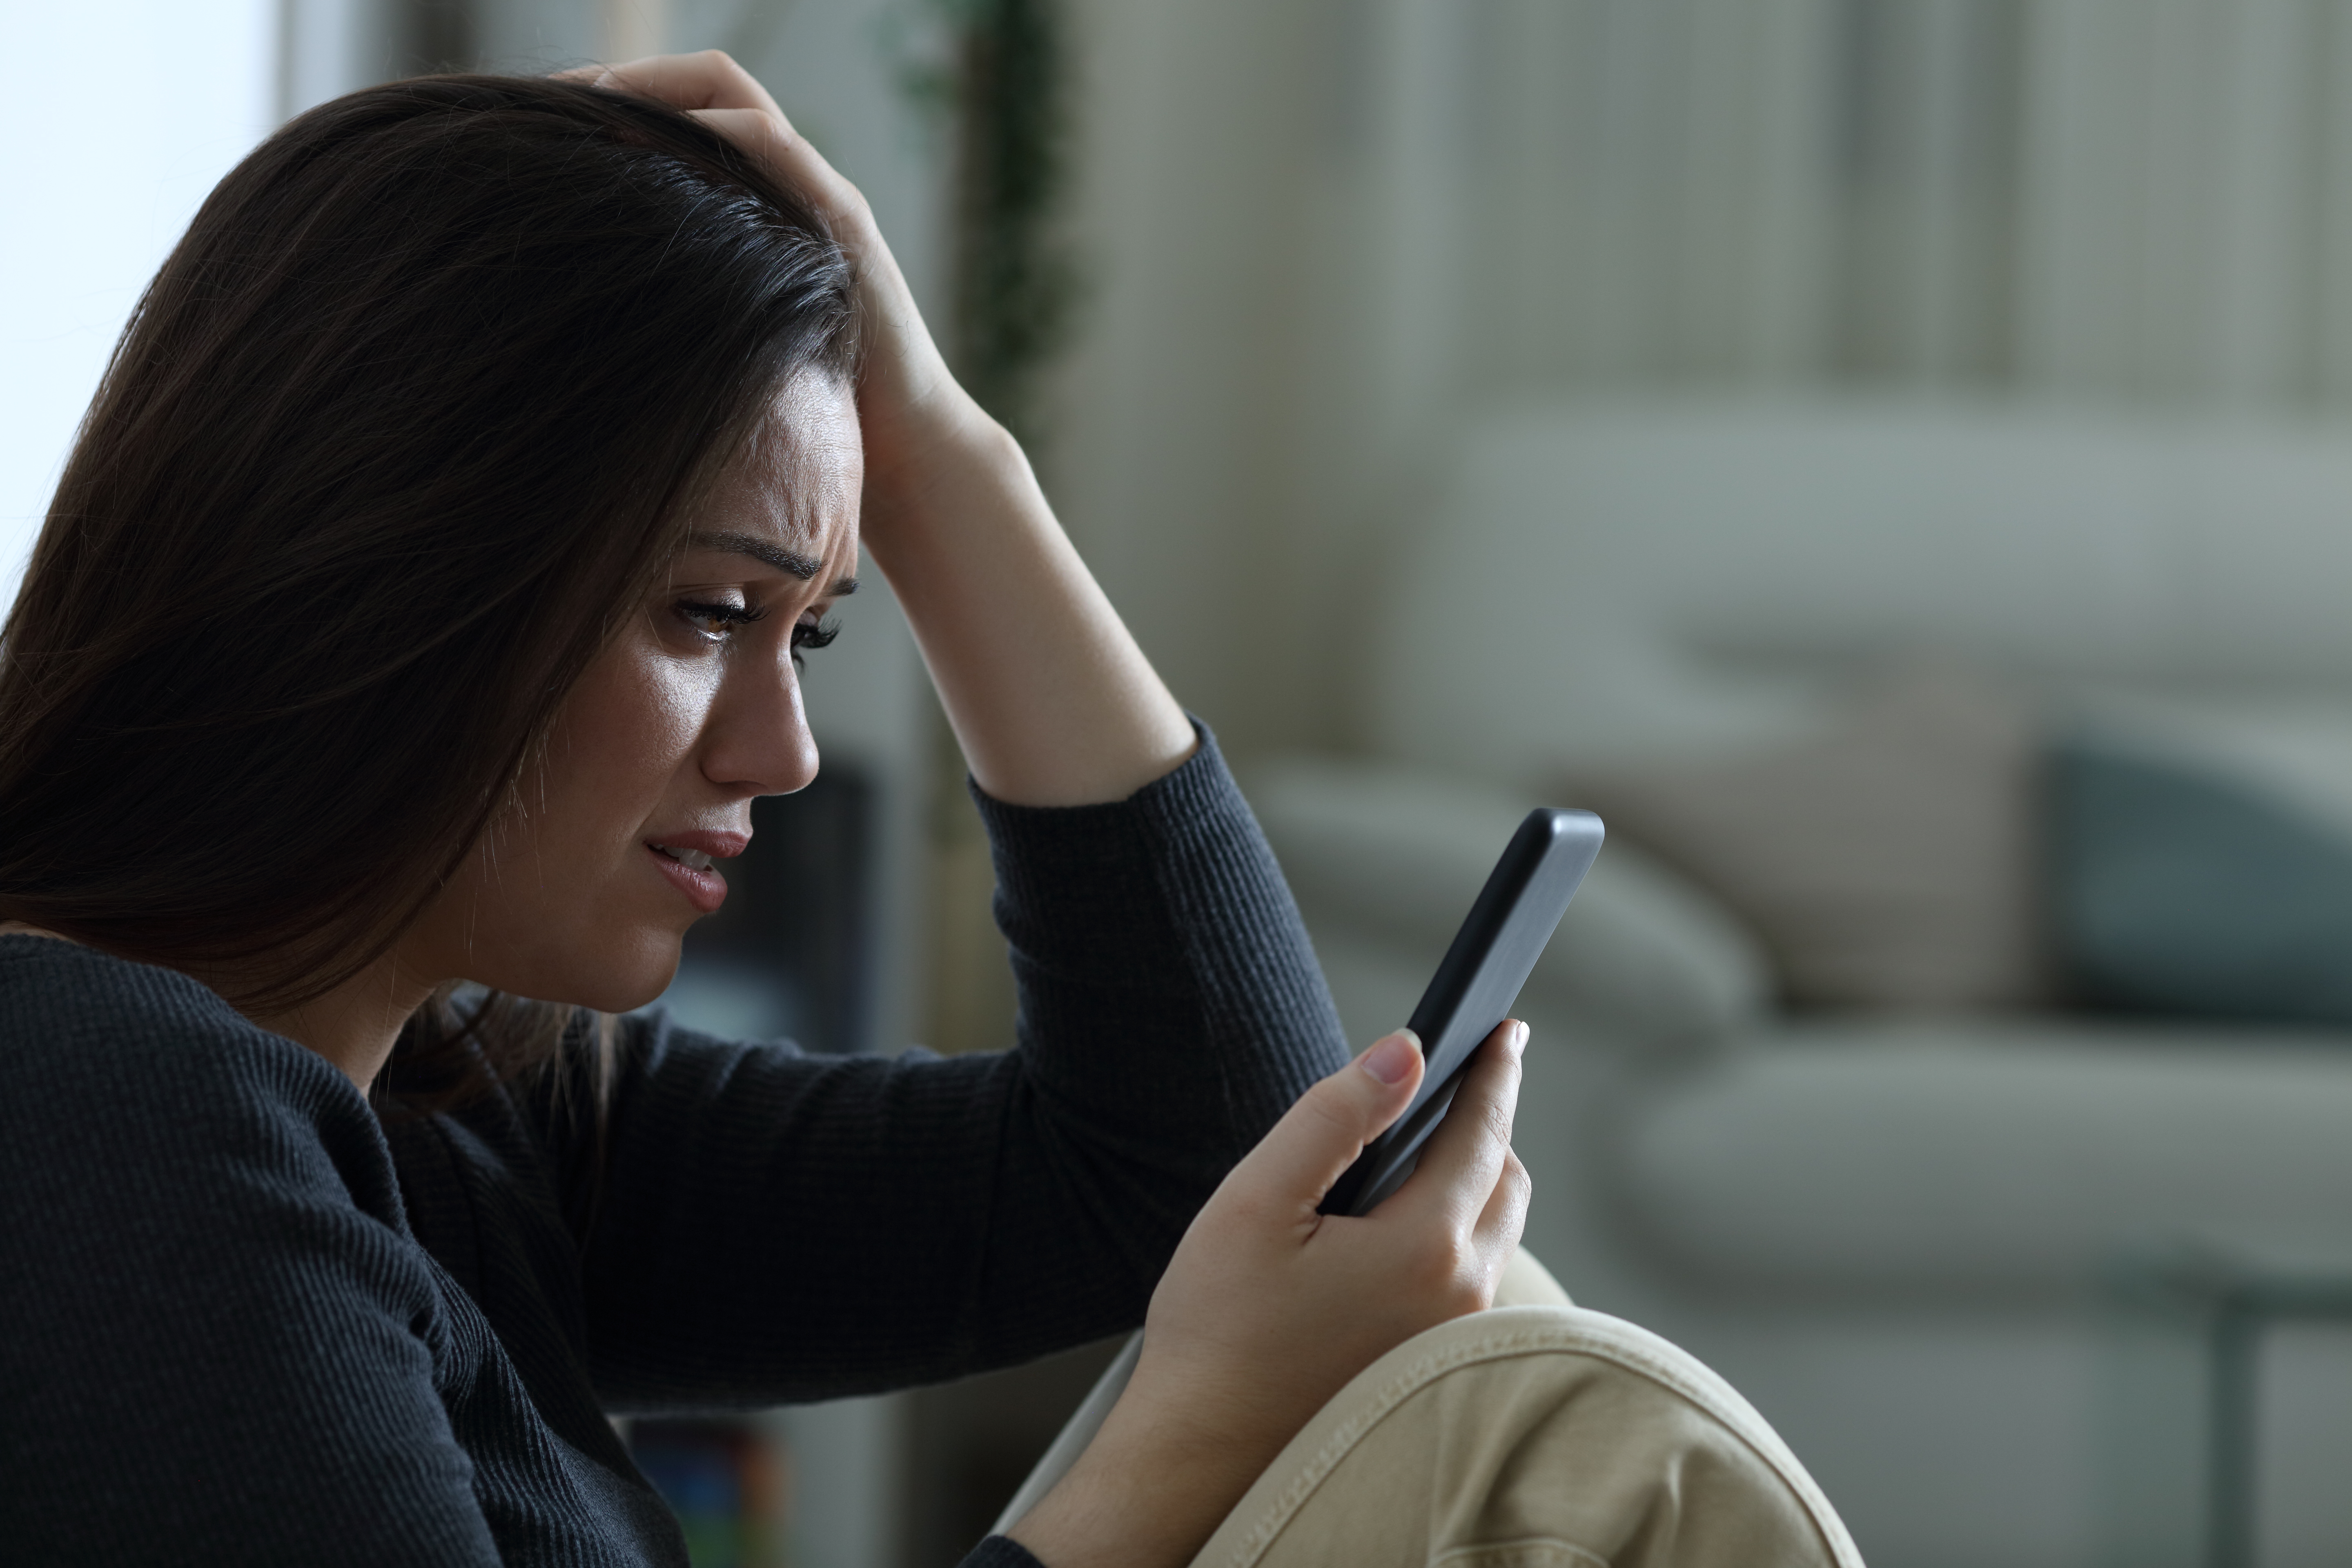 A sad woman looking at her phone | Source: Shutterstock